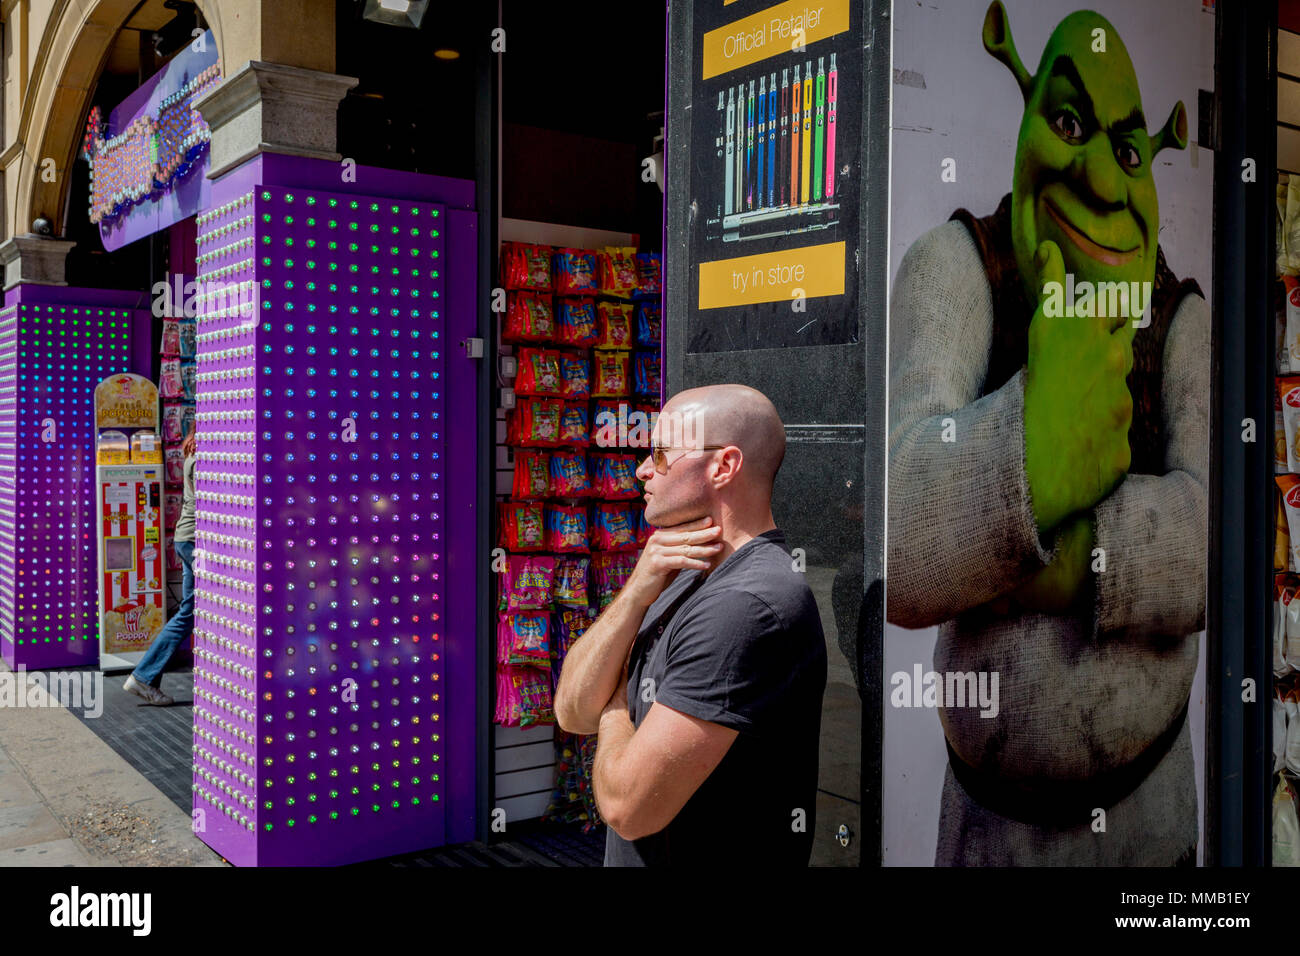 The fantasy monster Shrek and a bald man adopting the same postural echo outside a tourist trinket shop near Piccadilly Circus, on 9th May 2018, in London, England. Shrek is a 2001 American computer animated adventure fantasy comedy film loosely based on William Steig's 1990 fairy tale picture book Stock Photo